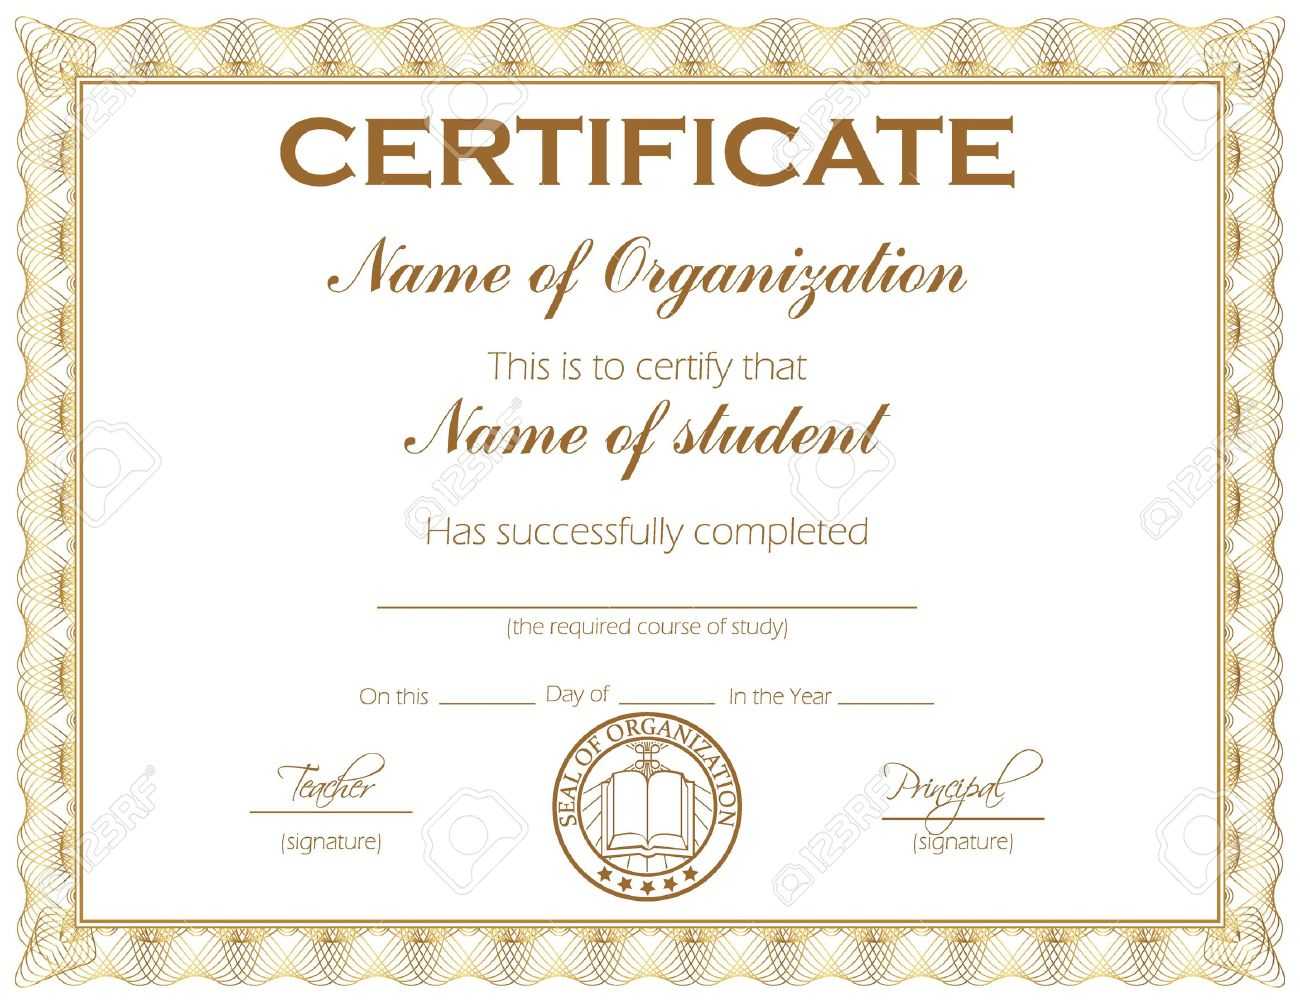 General Purpose Certificate Or Award With Sample Text That Can.. Intended For Template For Certificate Of Award